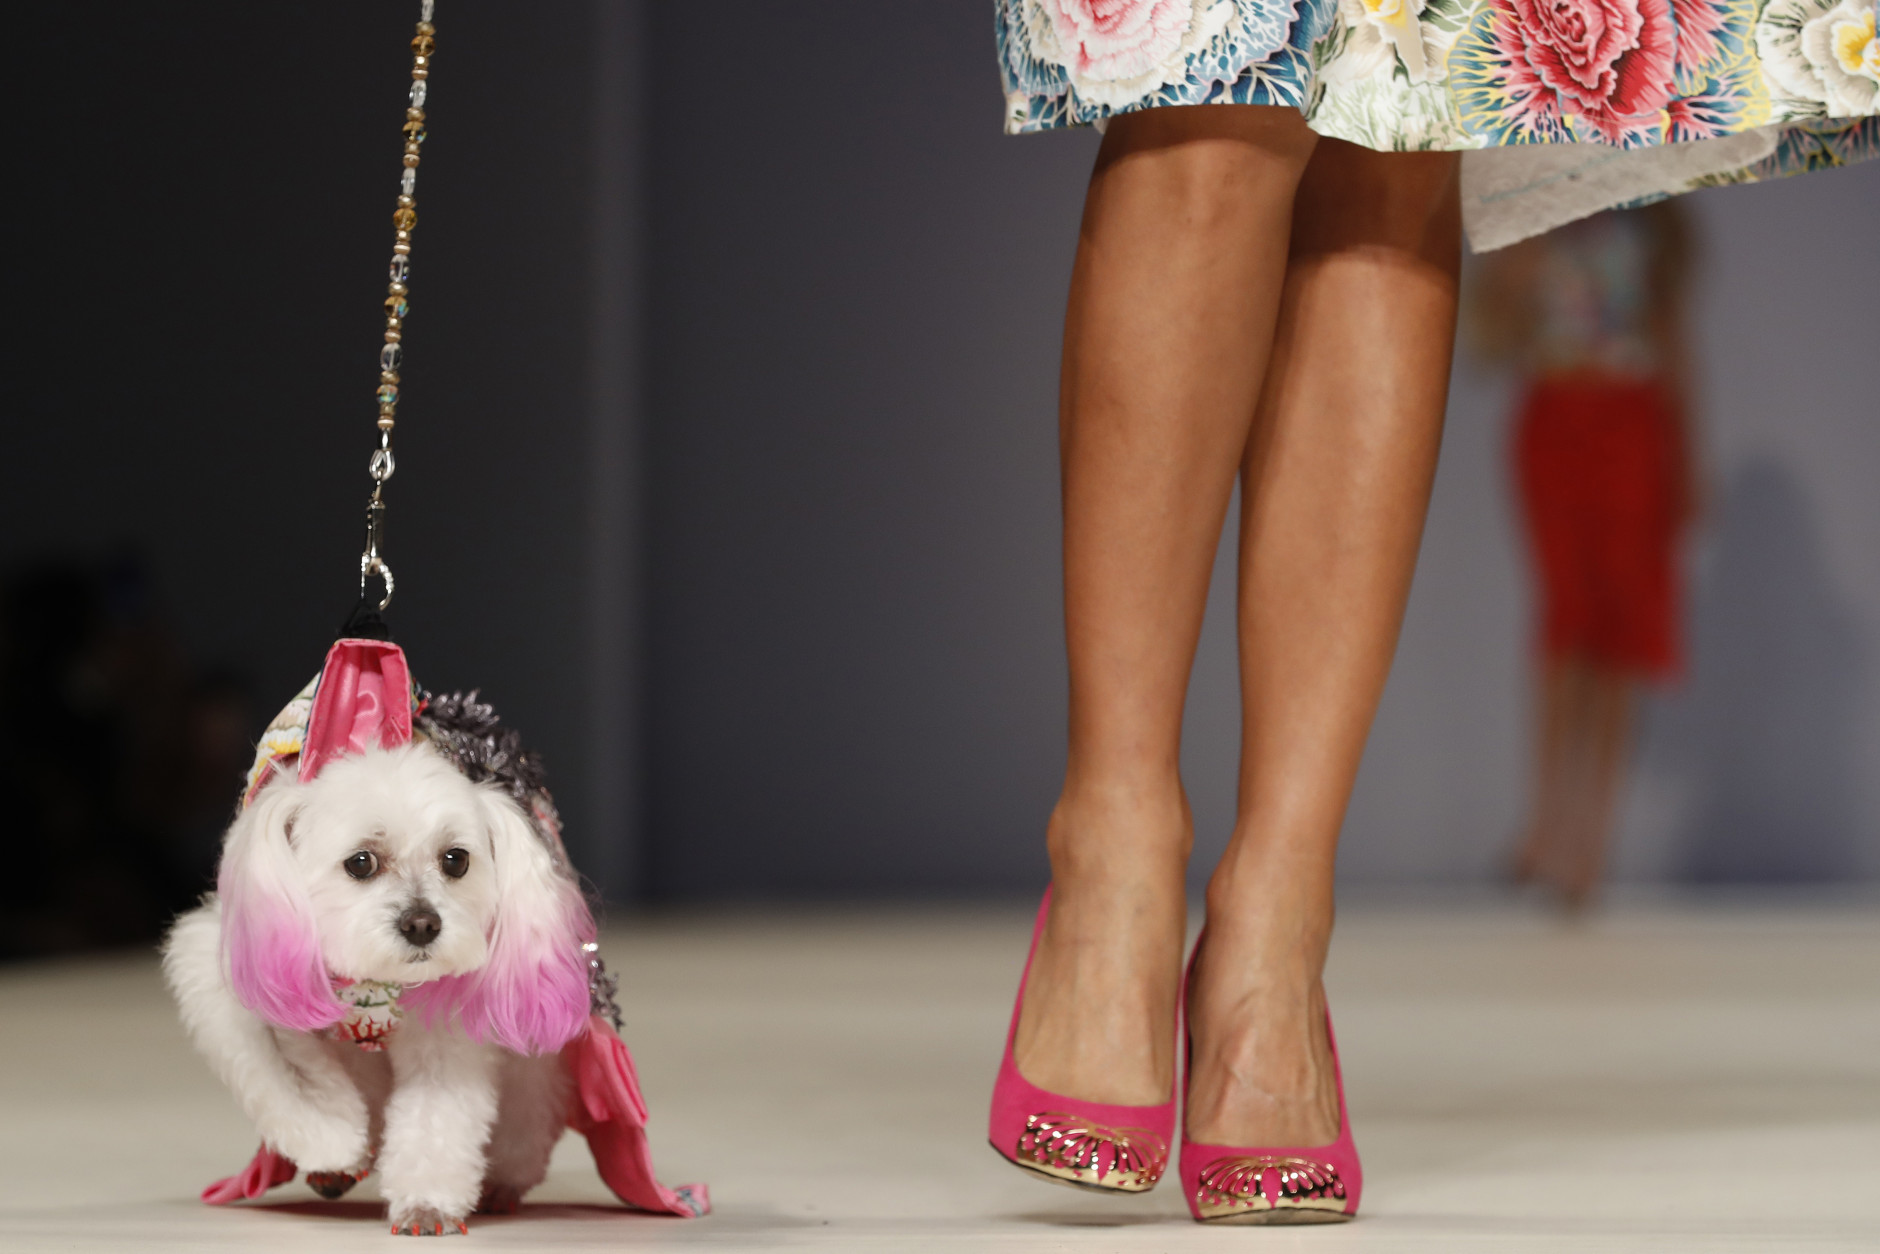 CORRECTS SPELLING OF CANINE - The Anthony Rubio canine couture and woman's wear collection is modeled during Fashion Week in New York, Friday, Sept. 9, 2016. (AP Photo/Mary Altaffer)